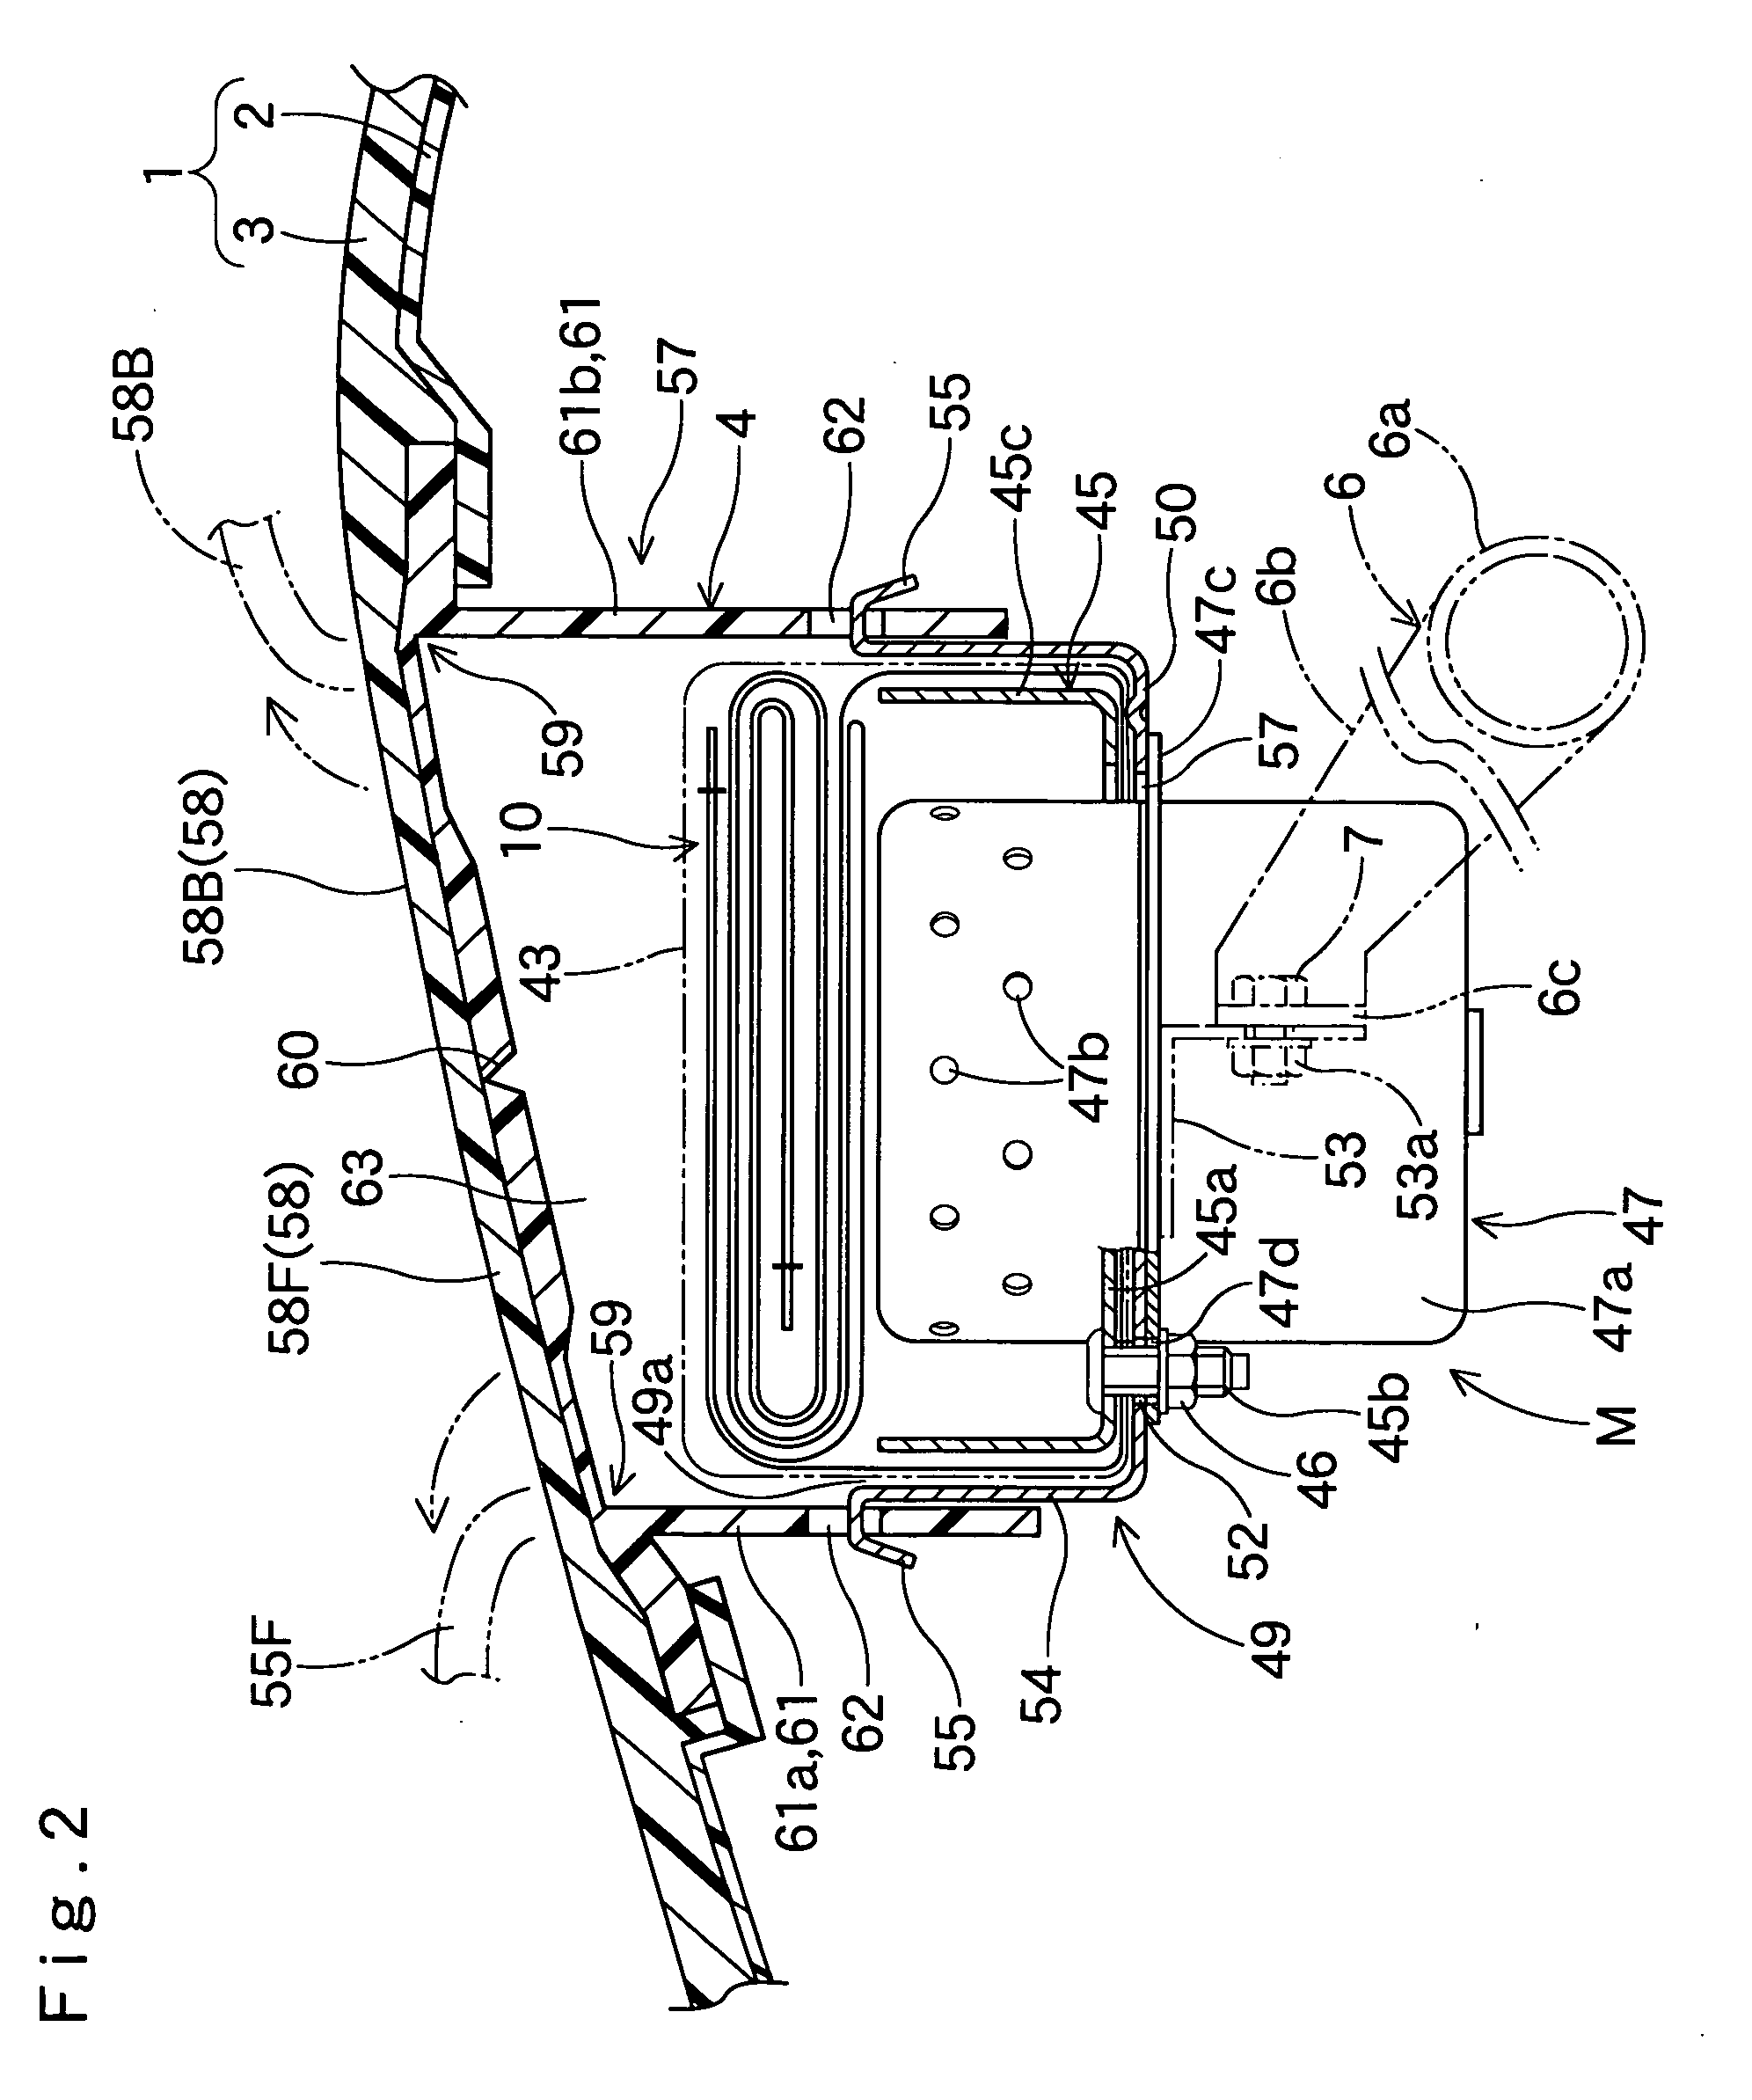 Airbag device for front passenger's seat